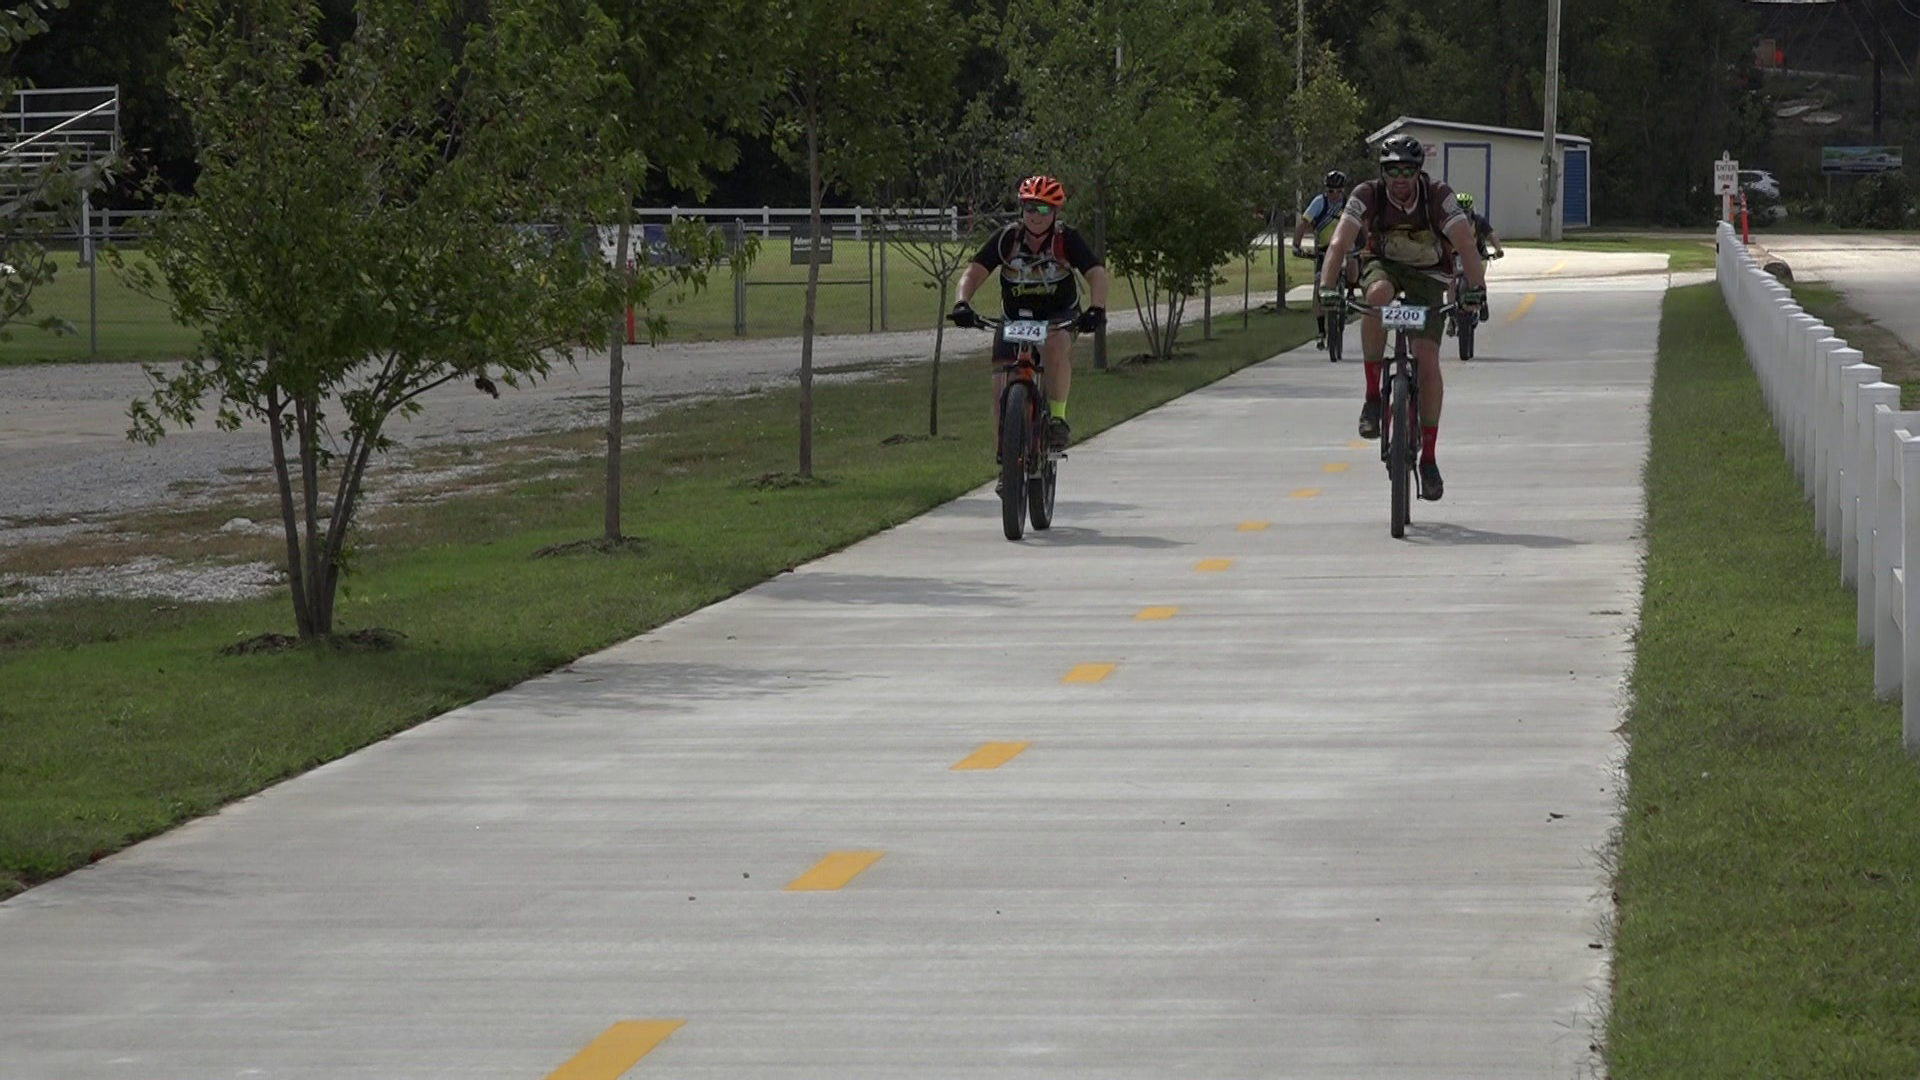 The Razorback Greenway added mile markers along their trail system under a new brand.